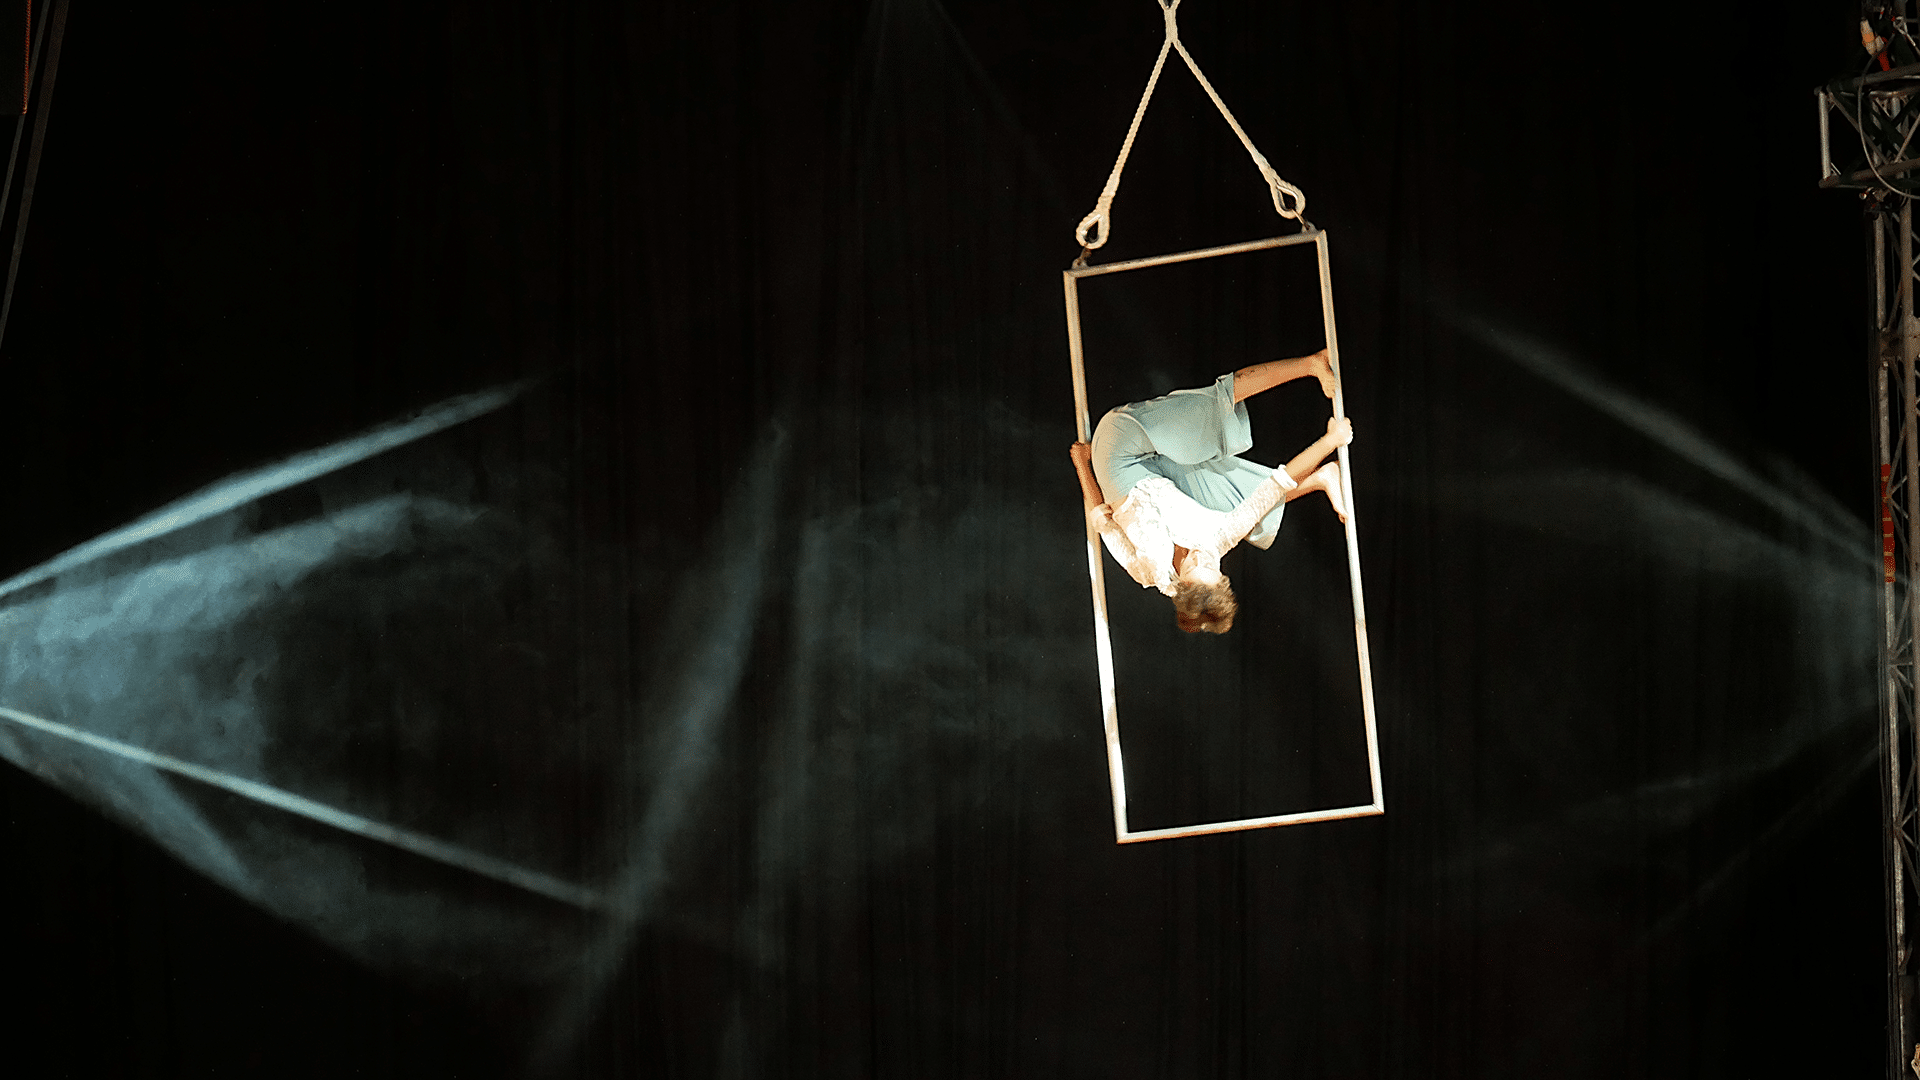 A circus artist performs an upside down move on a piece of aerial equipment.